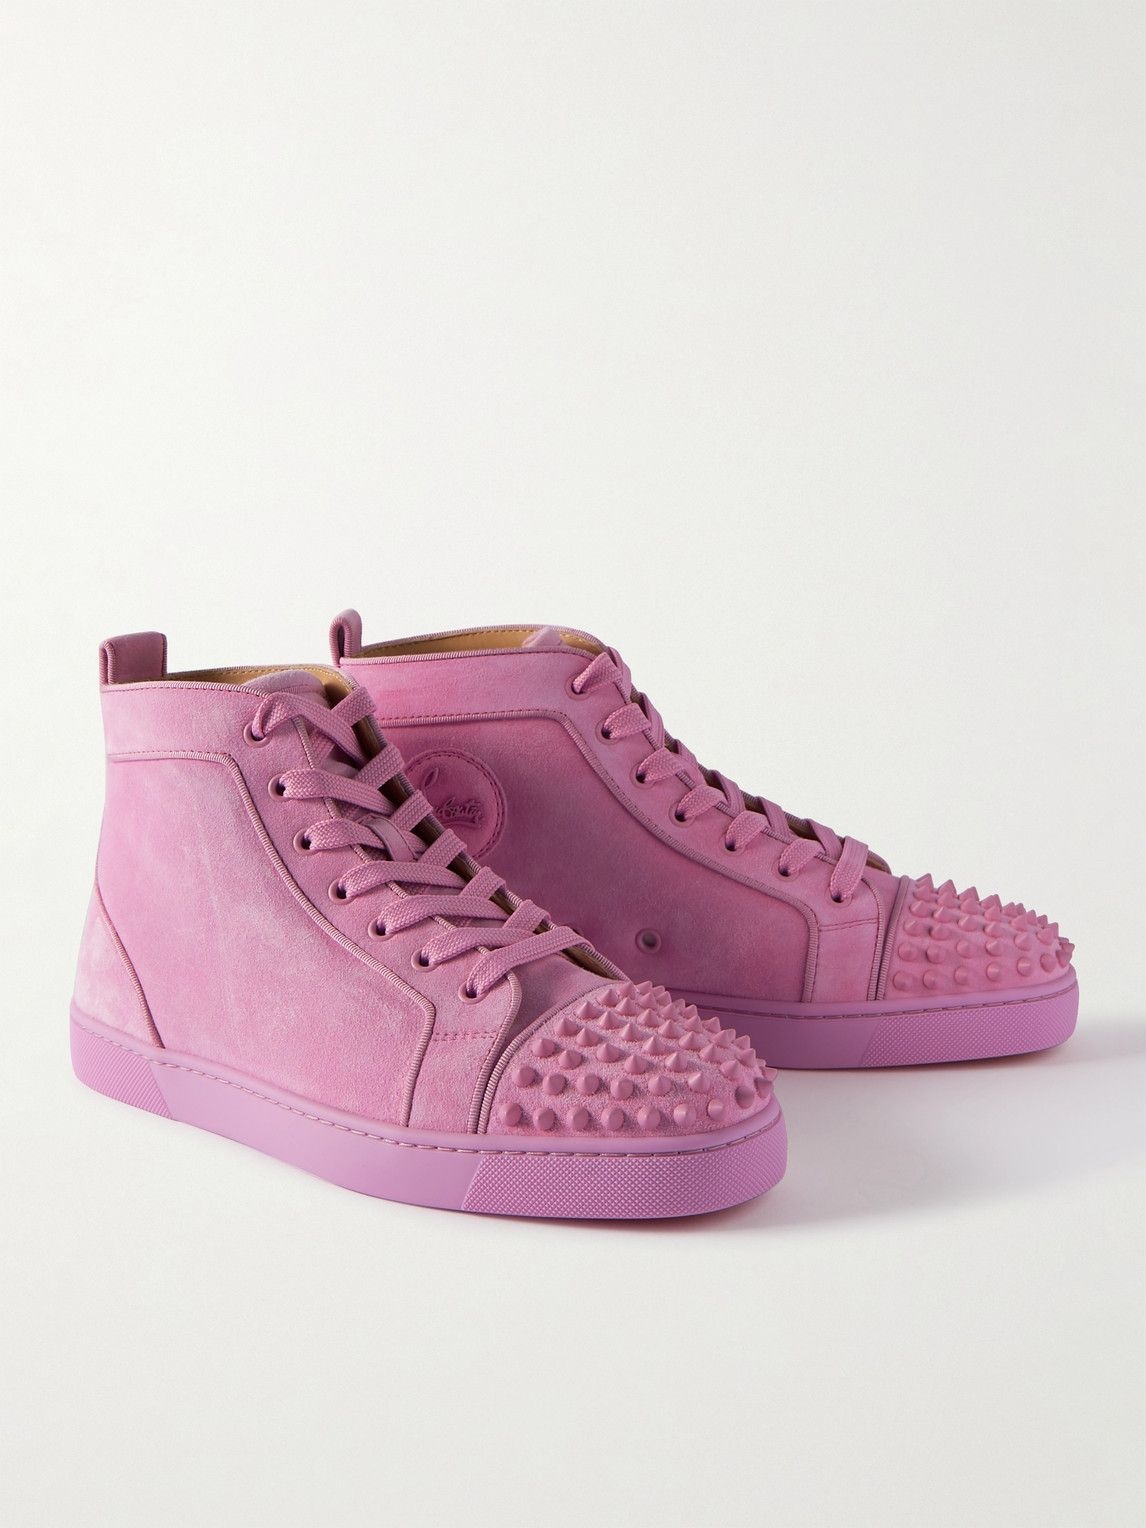 hvorfor ikke stamme Slette Christian Louboutin - Lou Spikes Orlato Suede High-Top Sneakers - Pink  Christian Louboutin